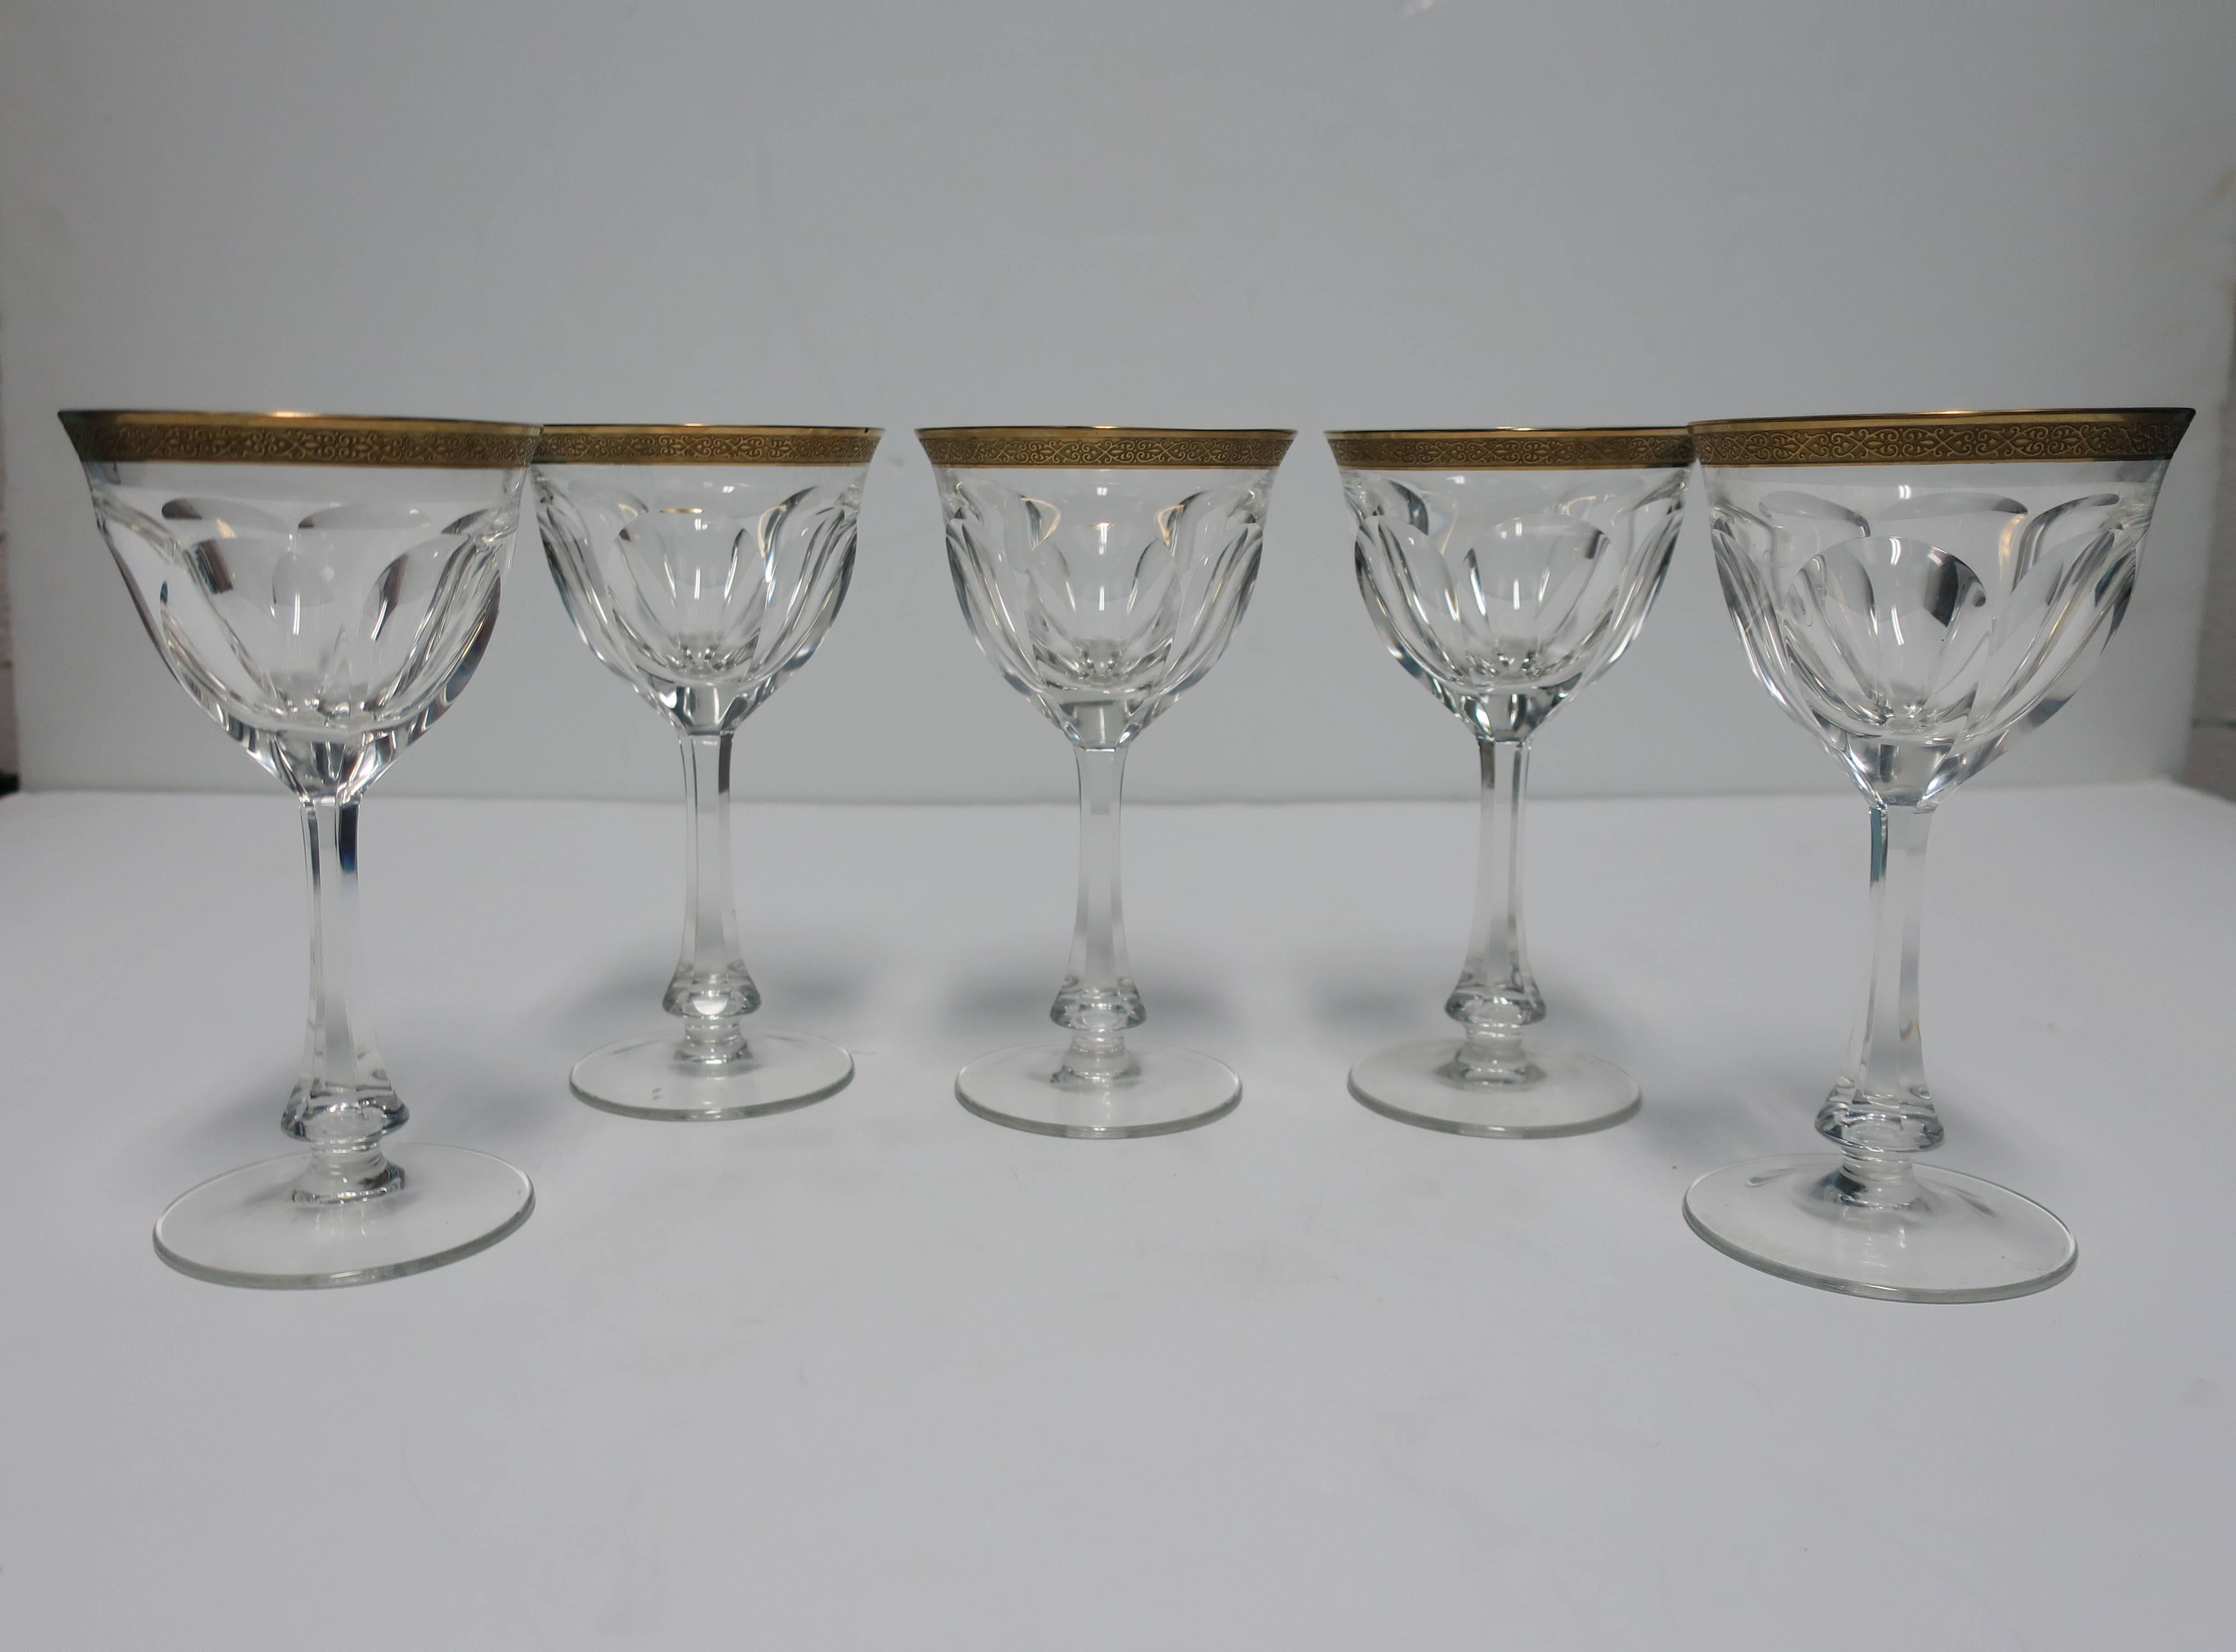 Gilt Gold Gilded Crystal Glasses in the Style of Baccarat